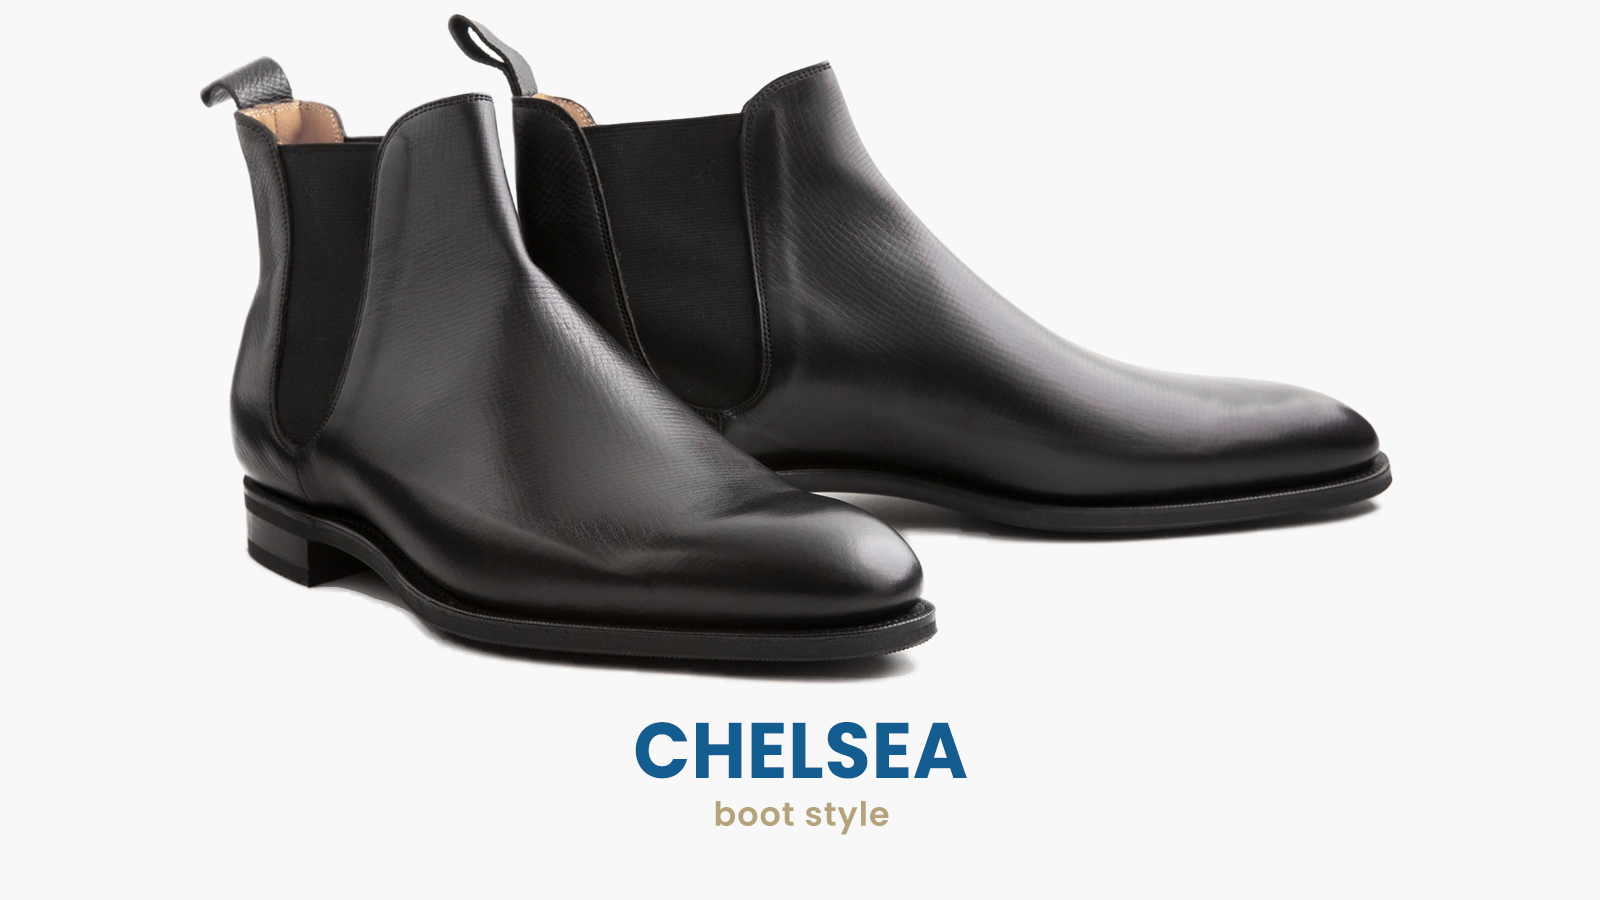 Chelsea boots style for men